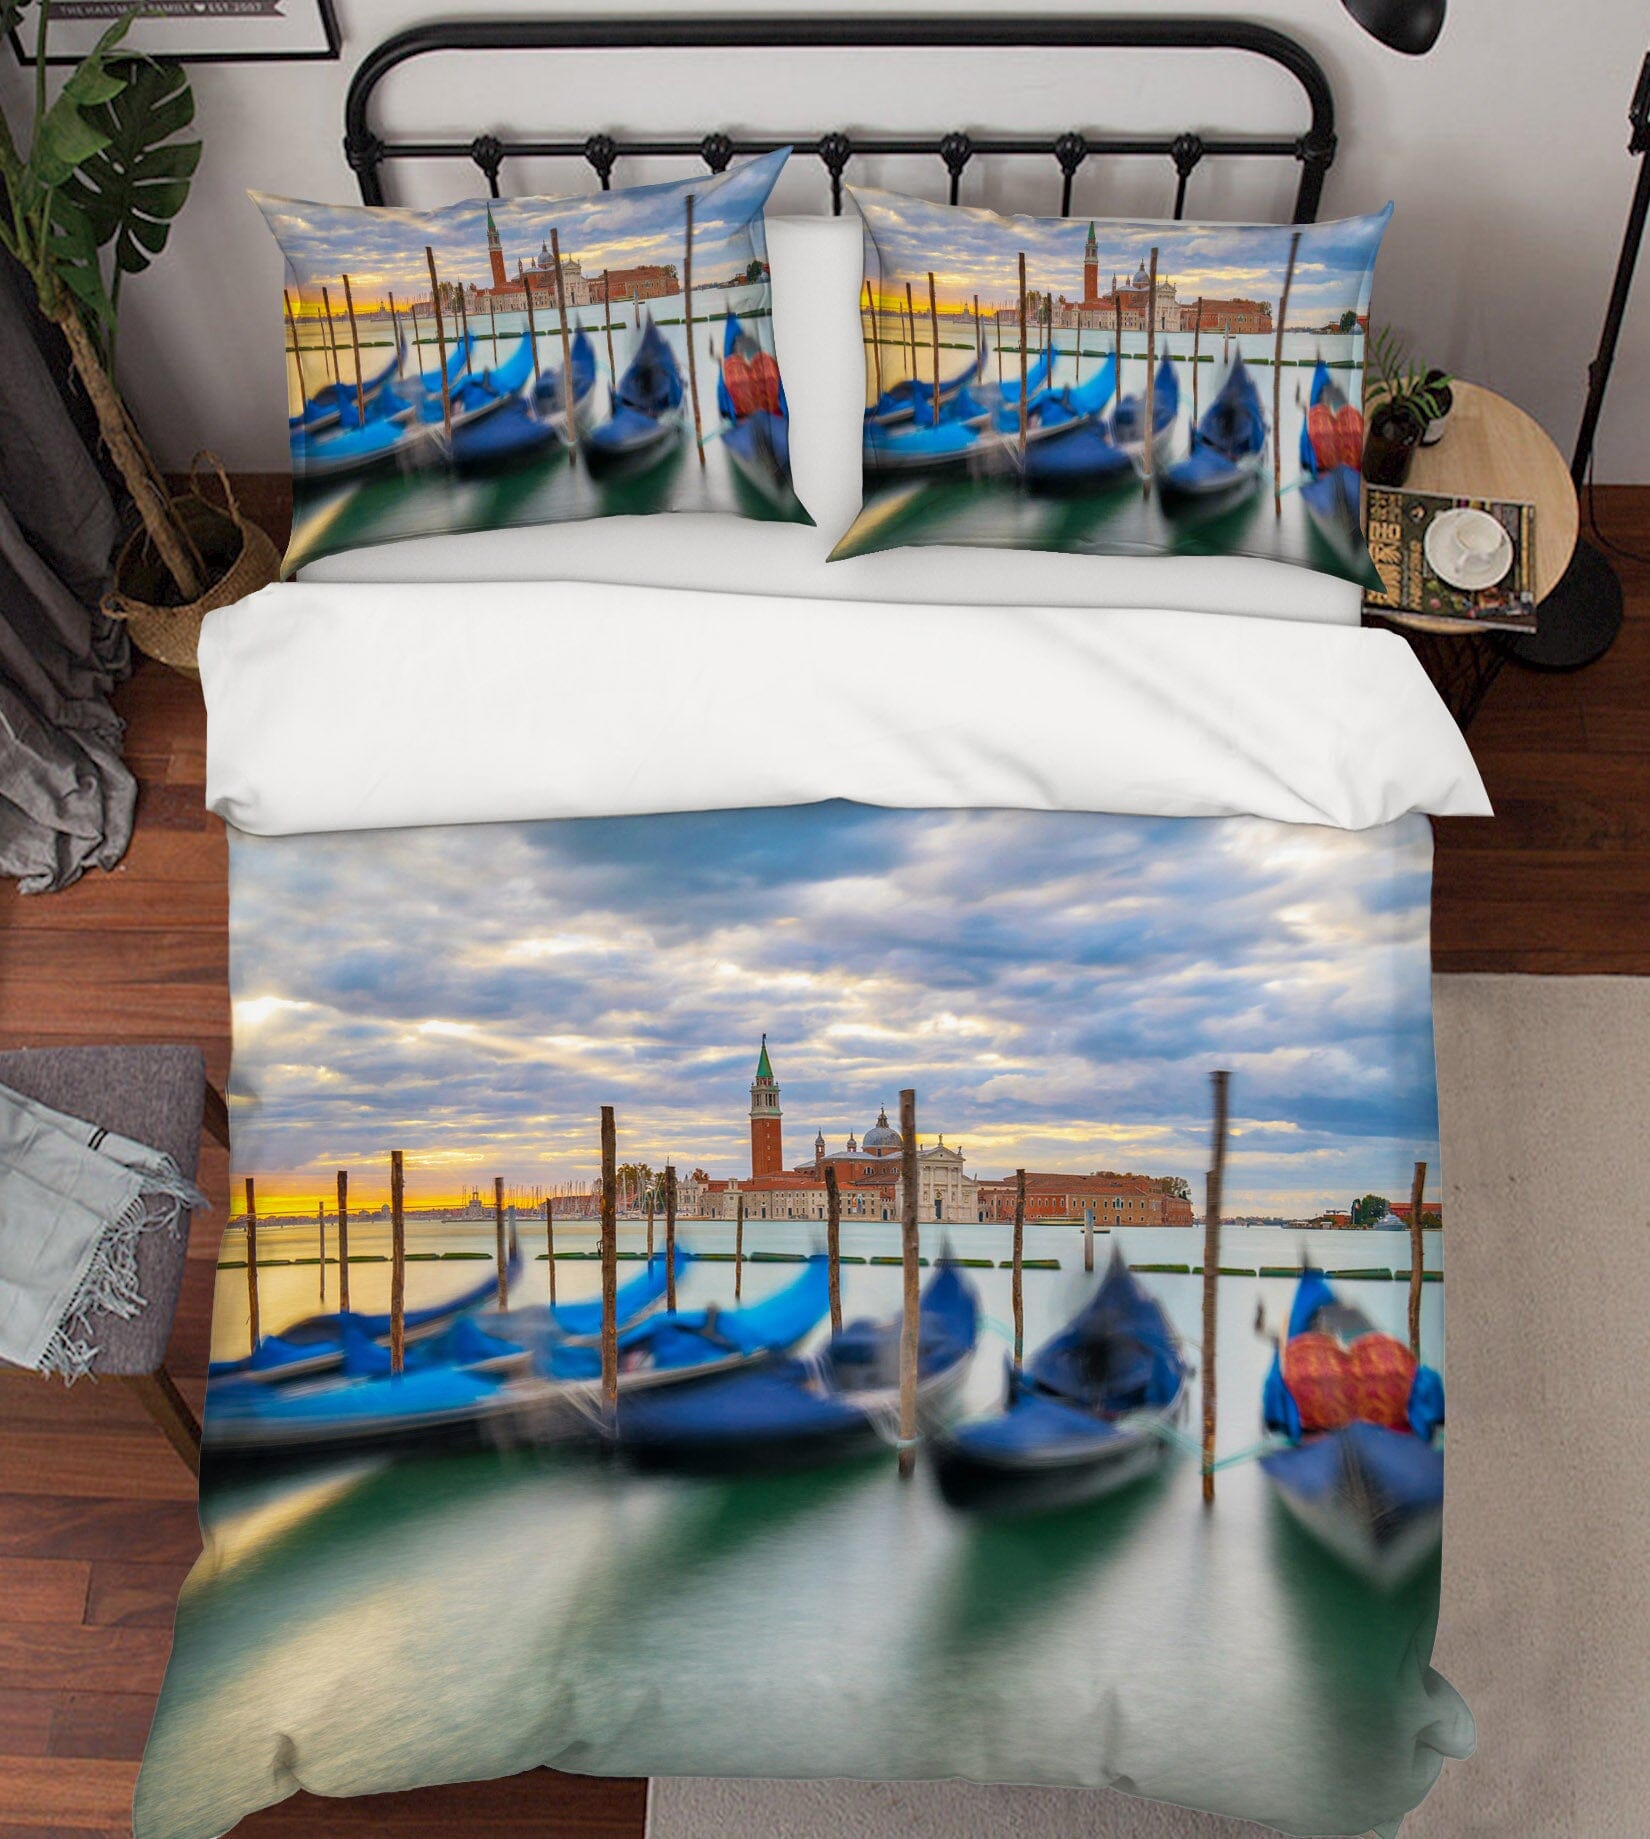 3D Canal Steamer 2114 Marco Carmassi Bedding Bed Pillowcases Quilt Quiet Covers AJ Creativity Home 